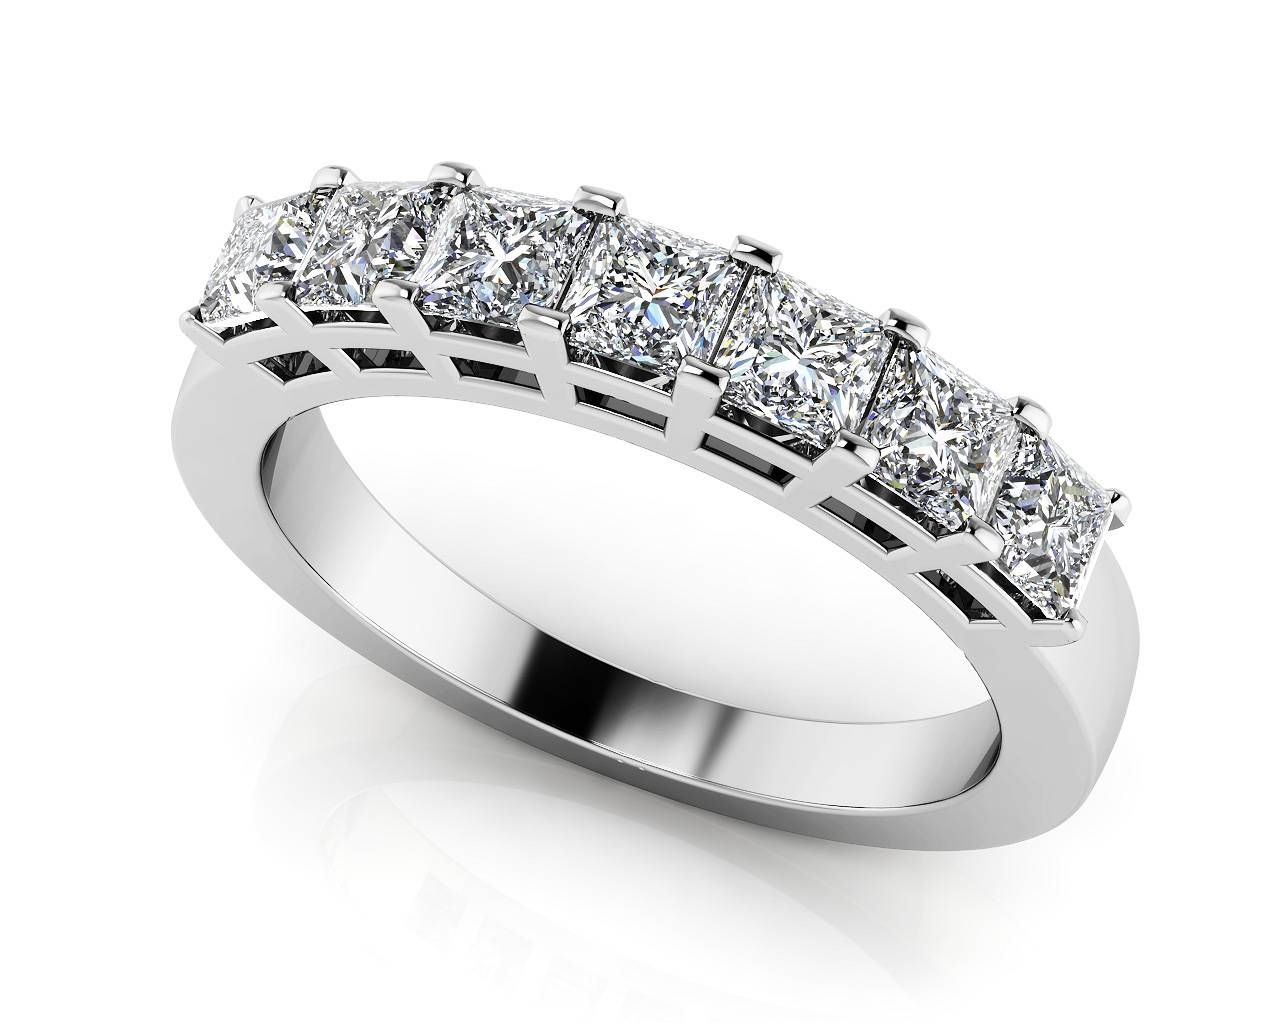 Design Your Own Diamond Anniversary Ring & Eternity Ring Throughout Most Up To Date Wedding Anniversary Rings (View 13 of 25)